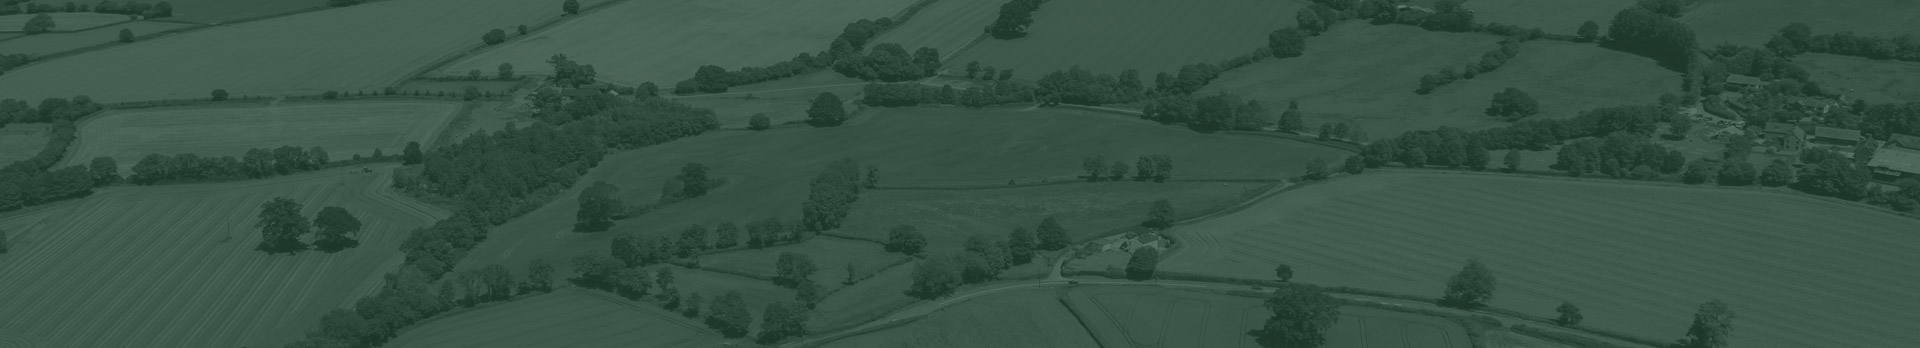 Understanding Brexit from an agricultural perspective